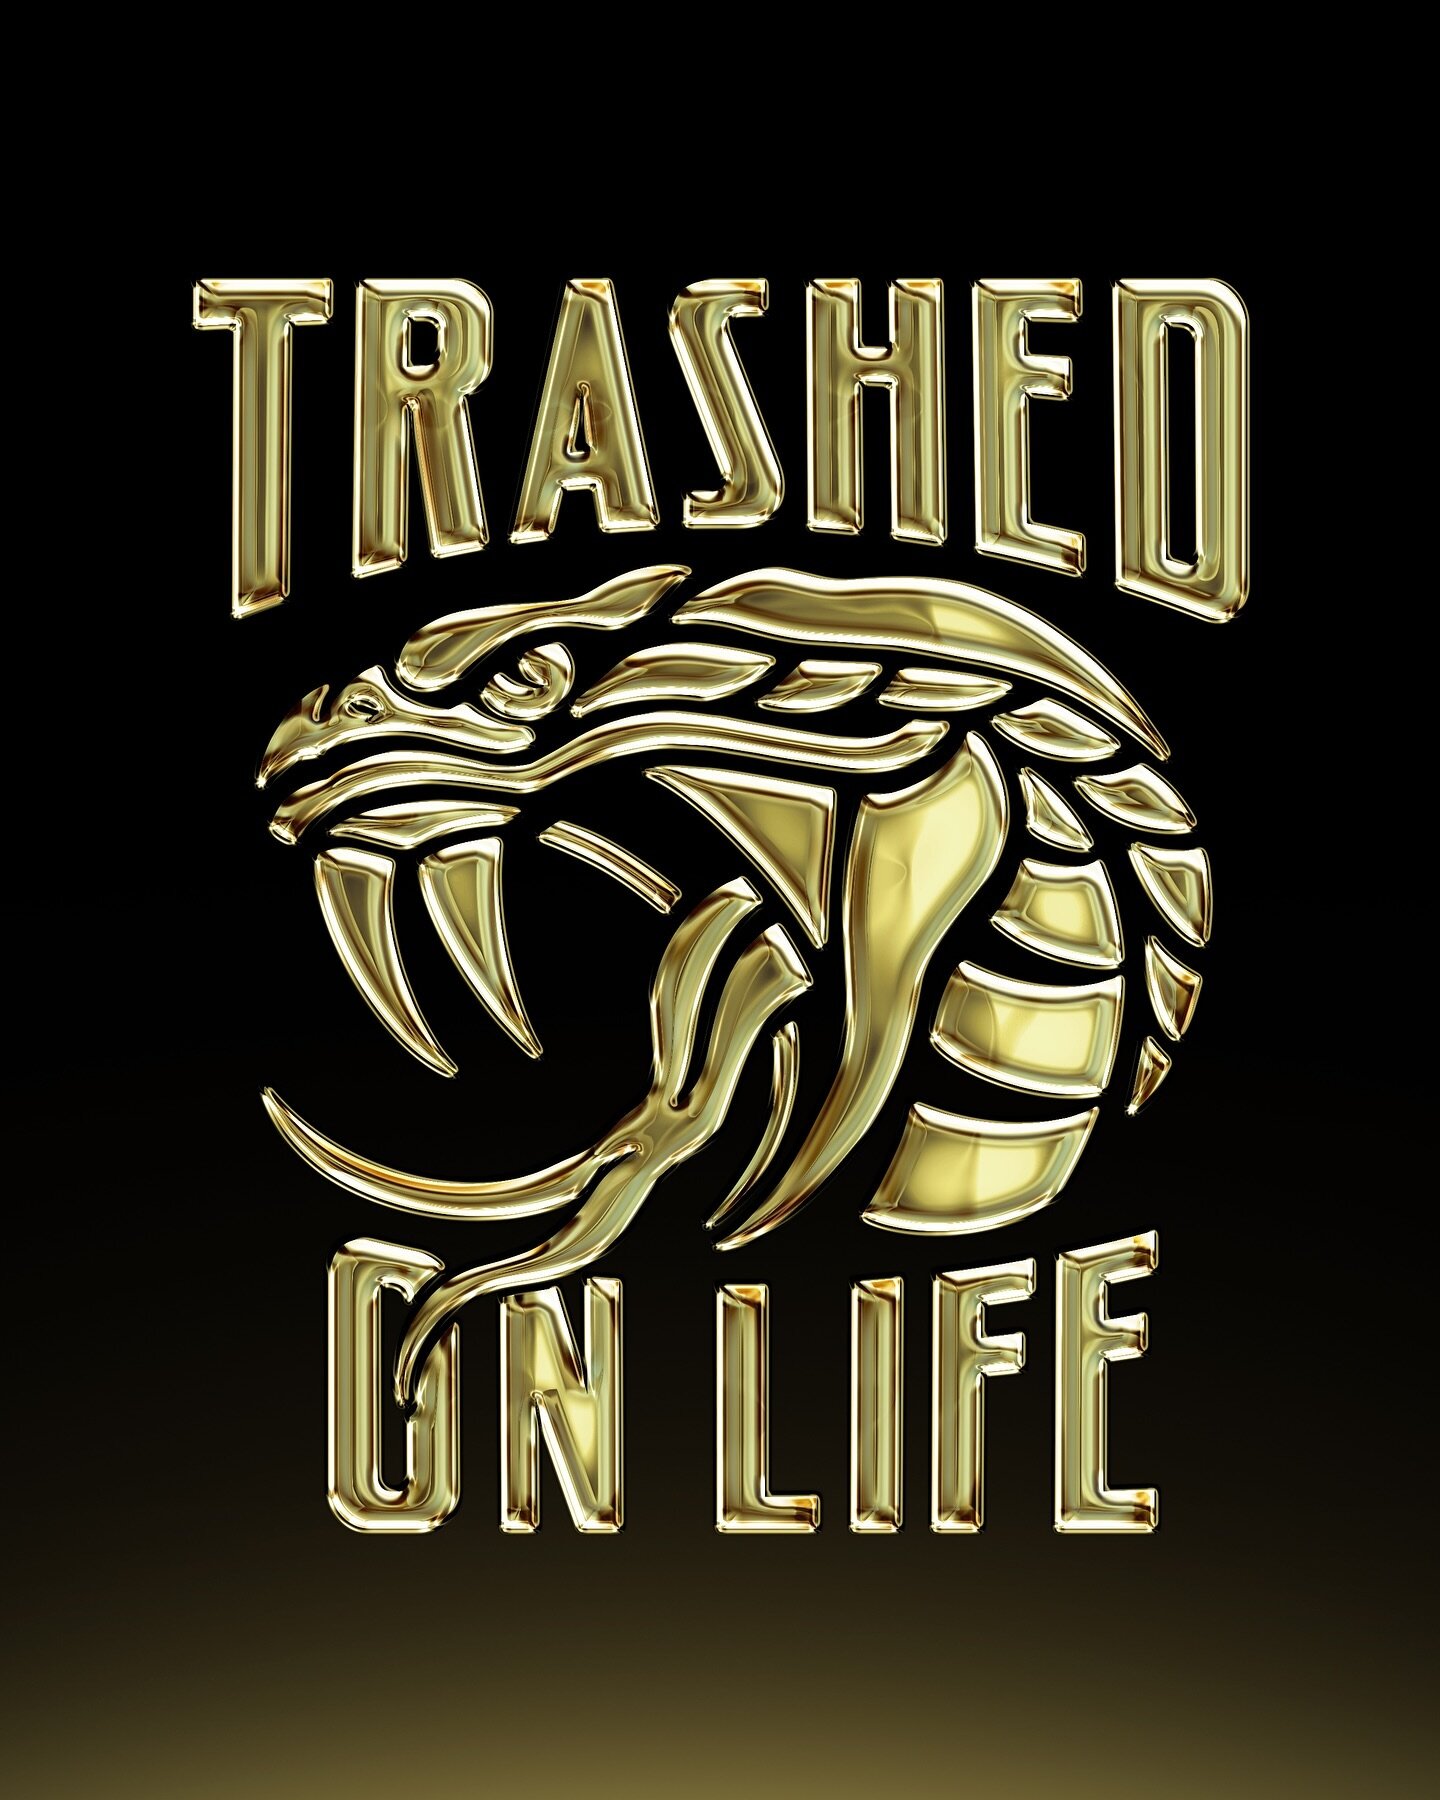 Get trashed on life. 🏆 Stay golden.🏆We created a non-alcoholic beer that drives a more badass approach to living life while not shying away from spontaneous acts of stupid. #stayreckless

#goodliar #drinkreckless #trashedonlife #nonalcoholic #nabee